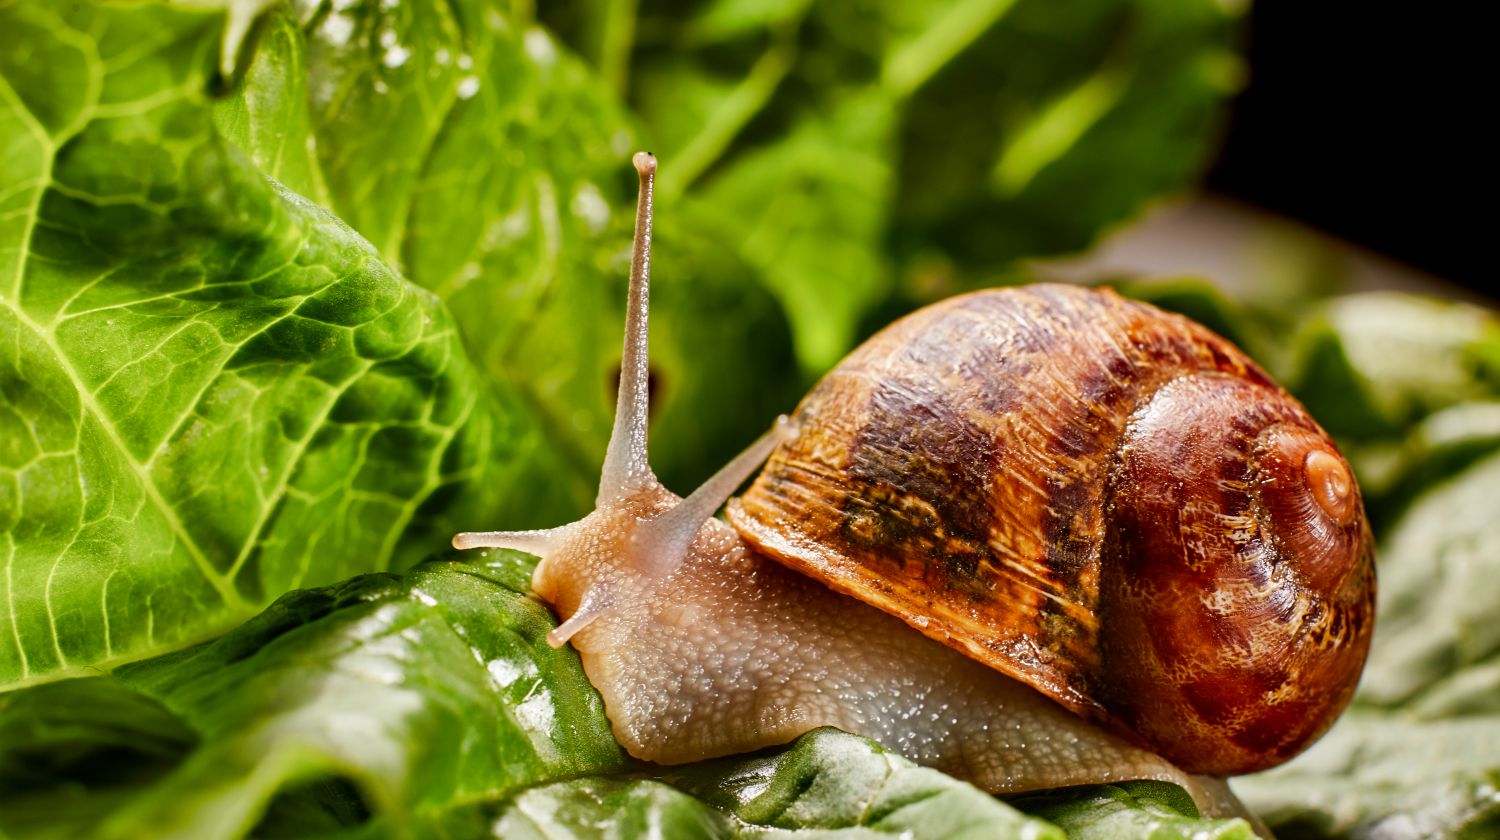 Feature | Snail muller gliding on the wet leaves | Quick Tips For Keeping Snails And Slugs Out Of Your Garden | Survival Gardening